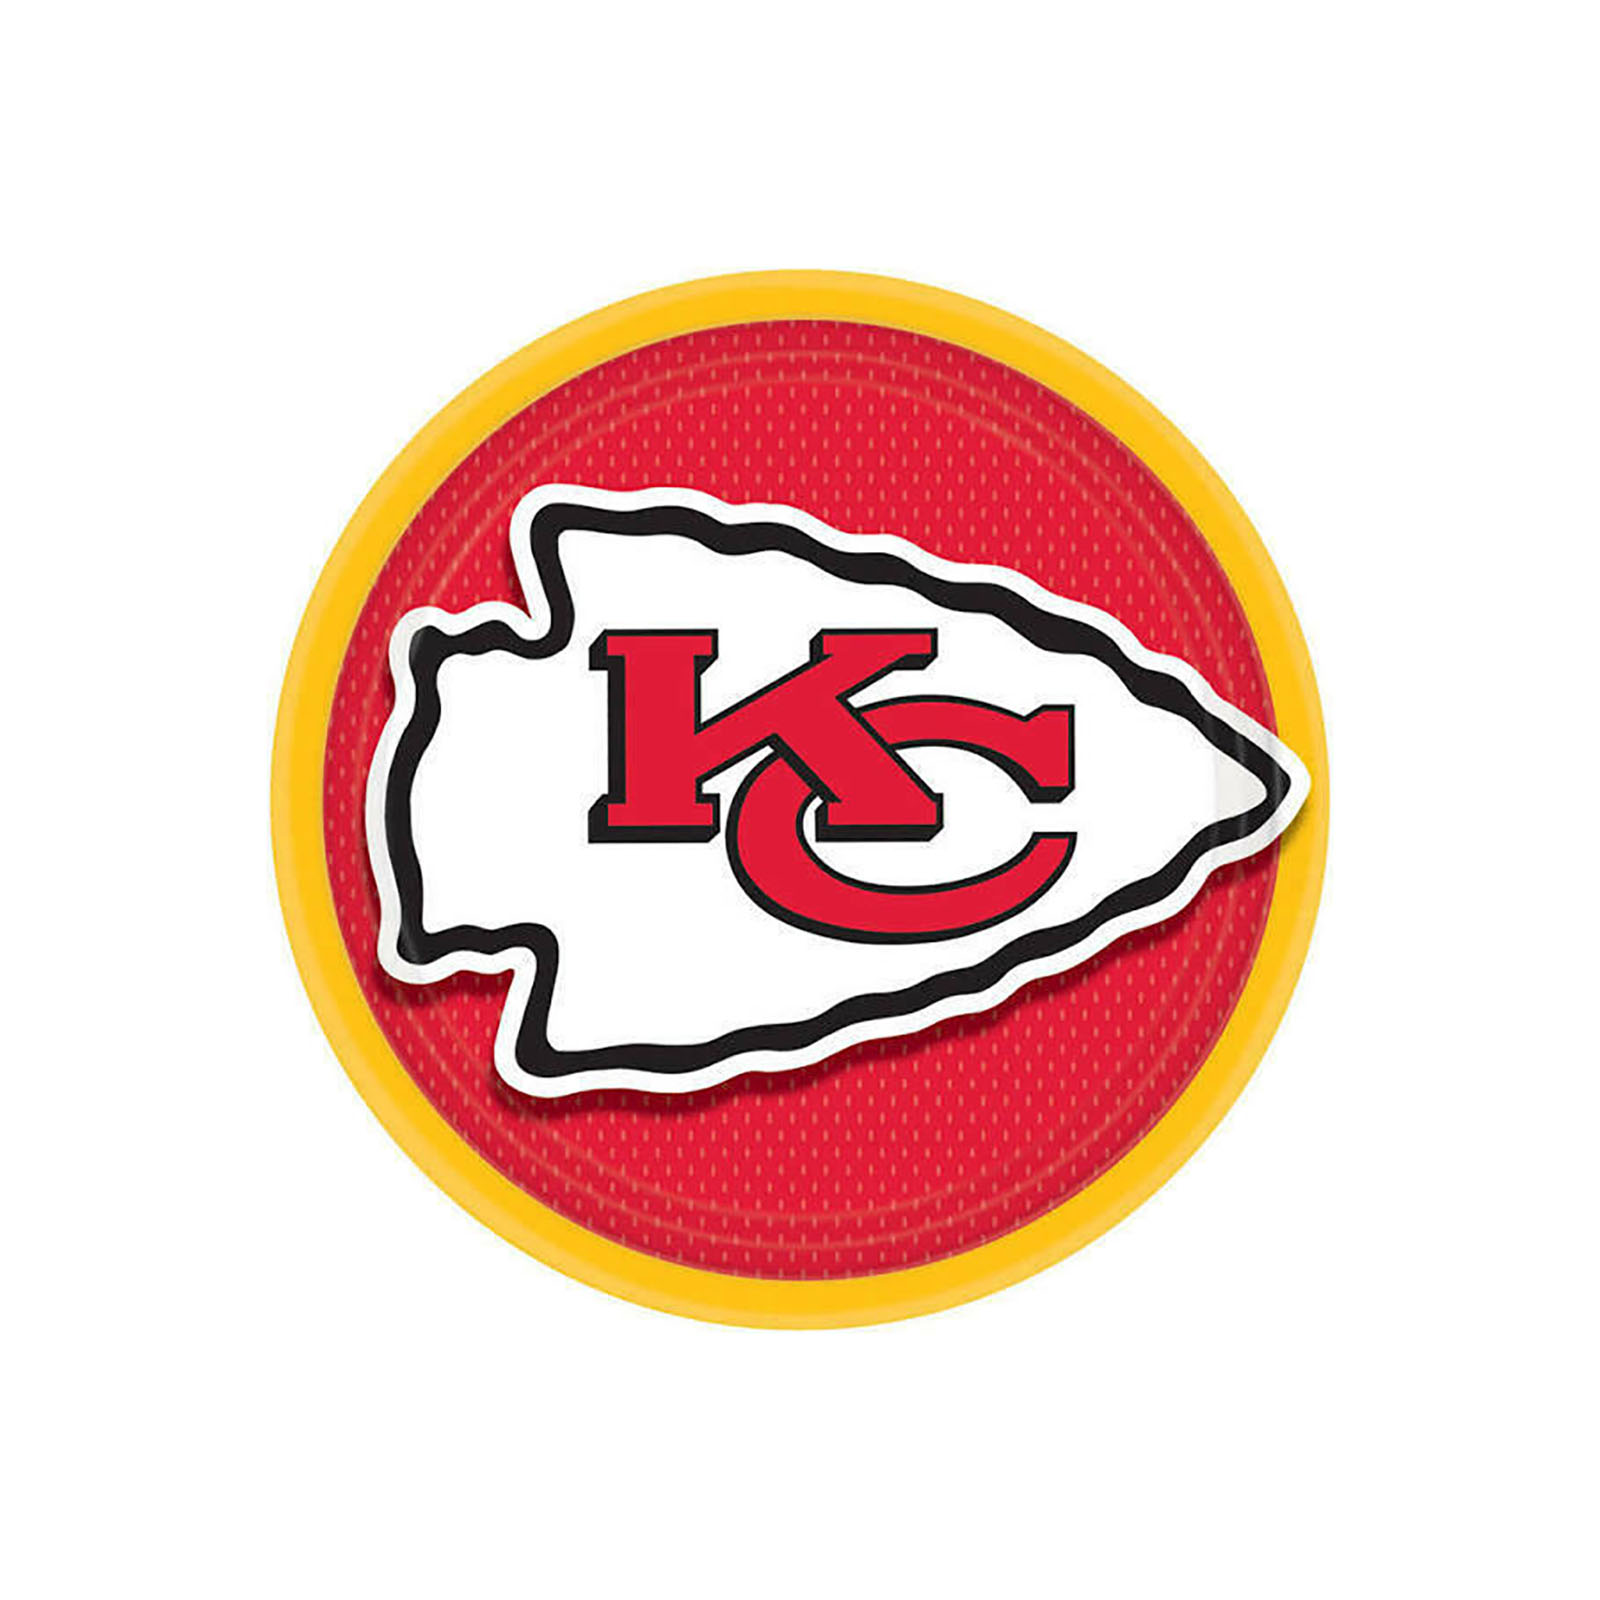 Amscan 8pc. Kansas City Chiefs 9" Dinner Plates - Red and Yellow